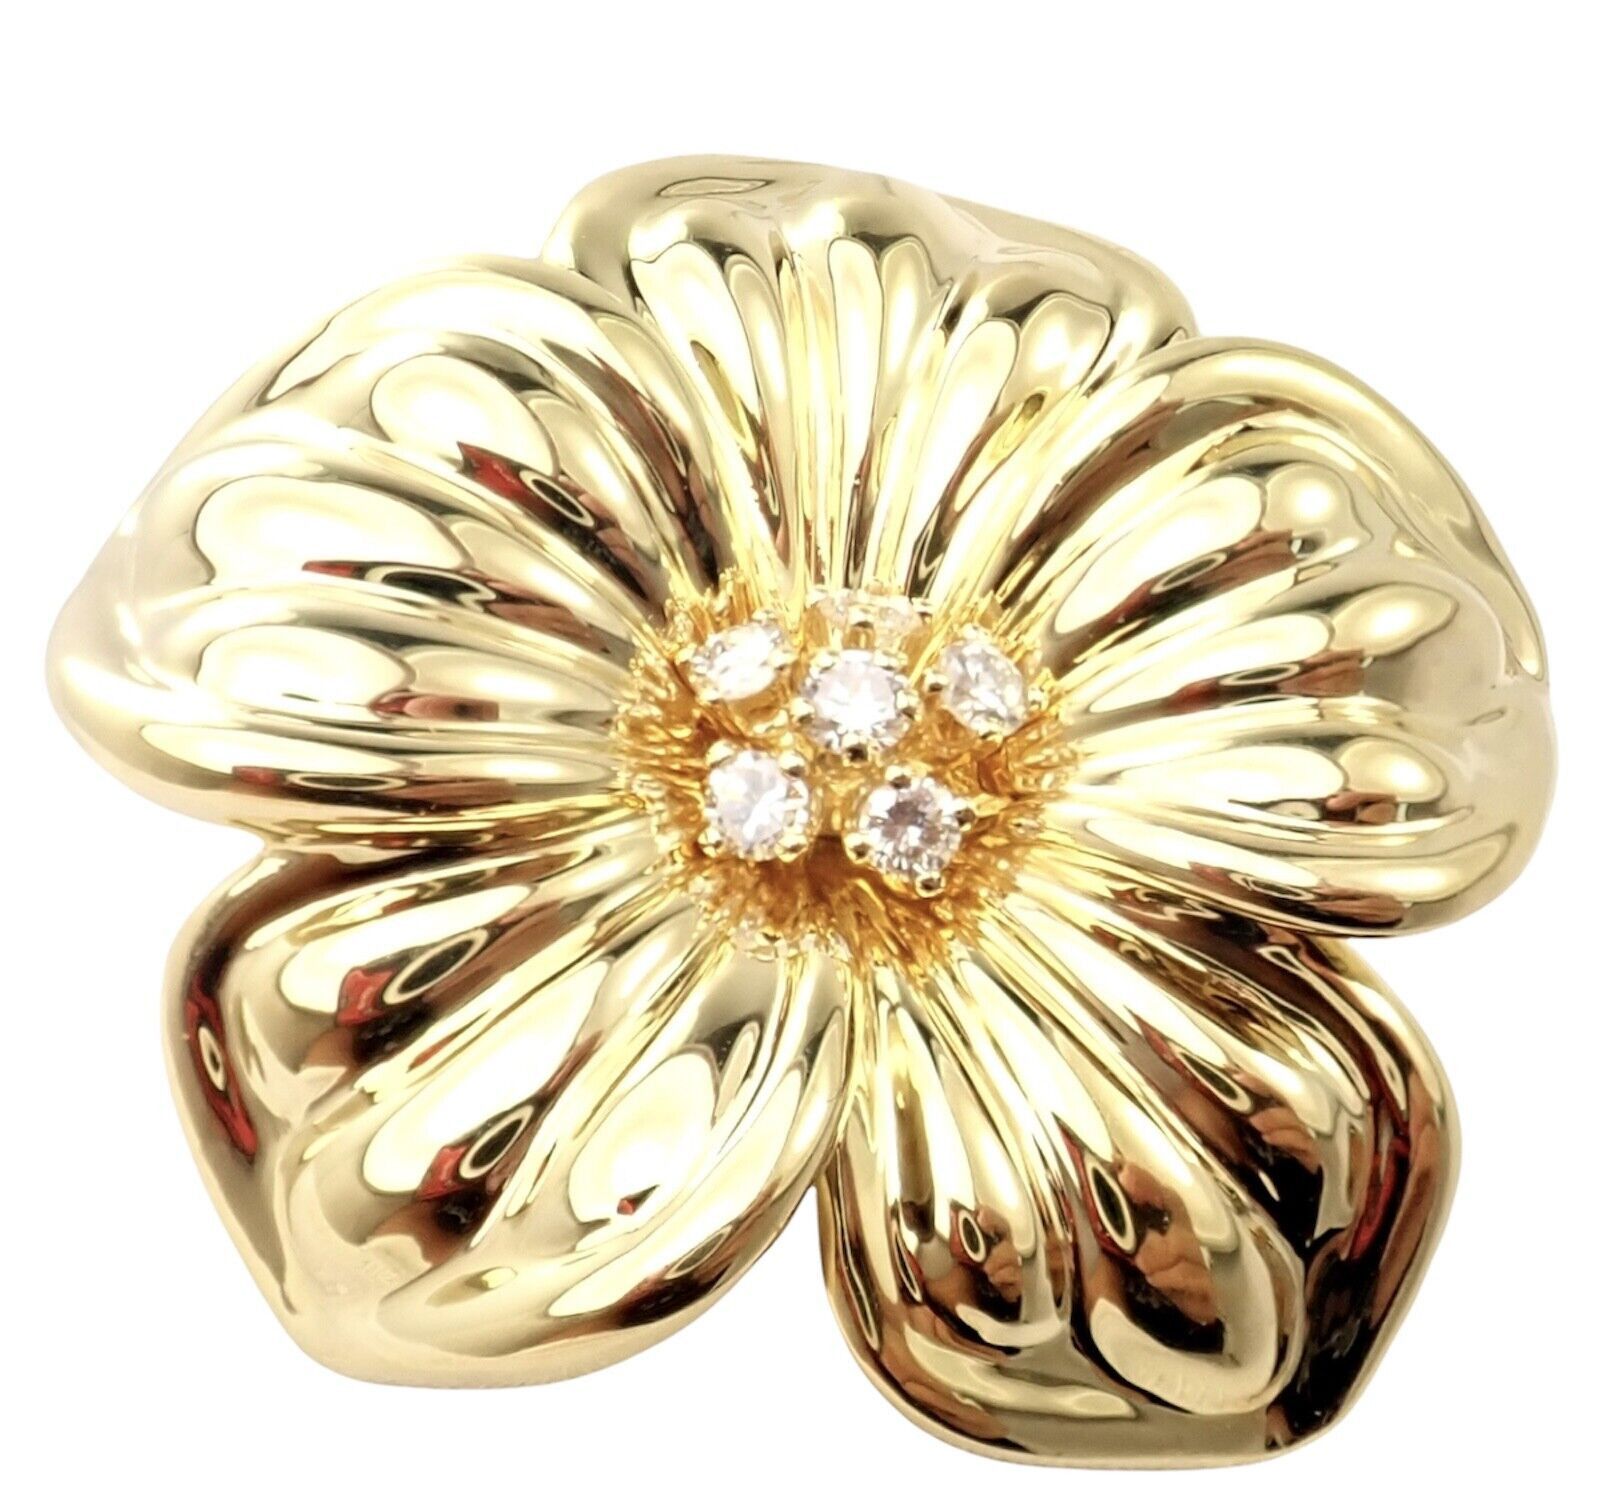 Van Cleef & Arpels Diamond 18k Yellow Gold Magnolia Flower Pin Brooch Size ONE SIZE - 10 Thumbnail